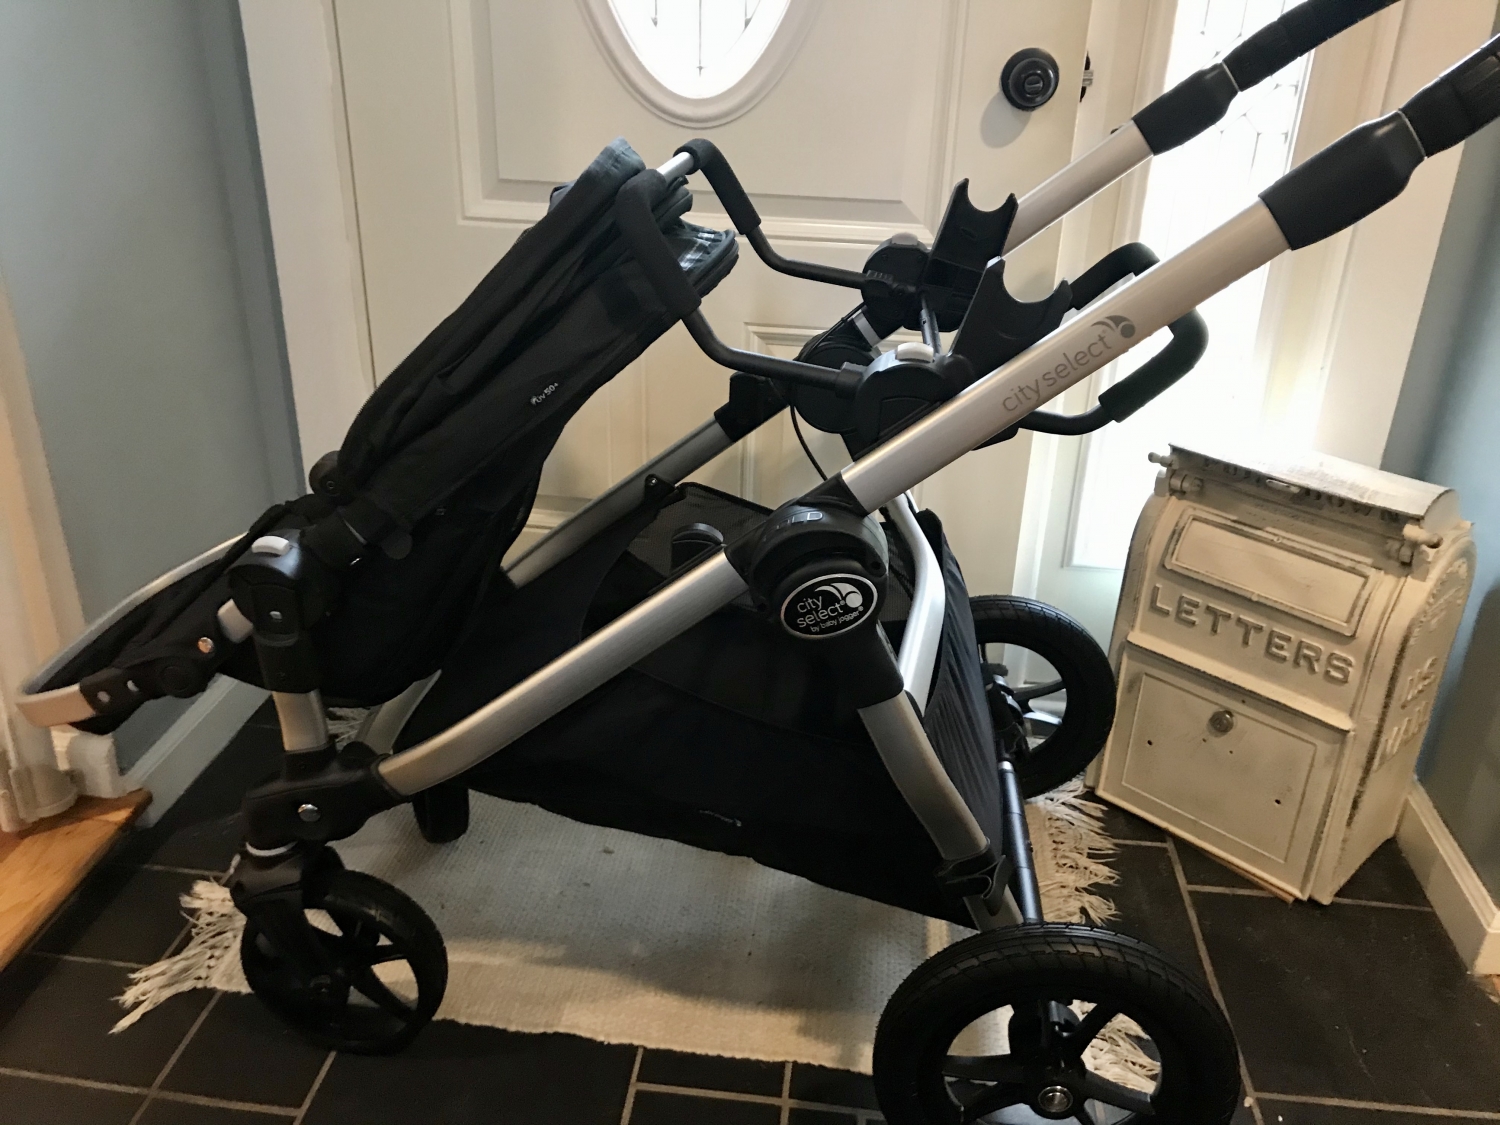 2014 city select double stroller